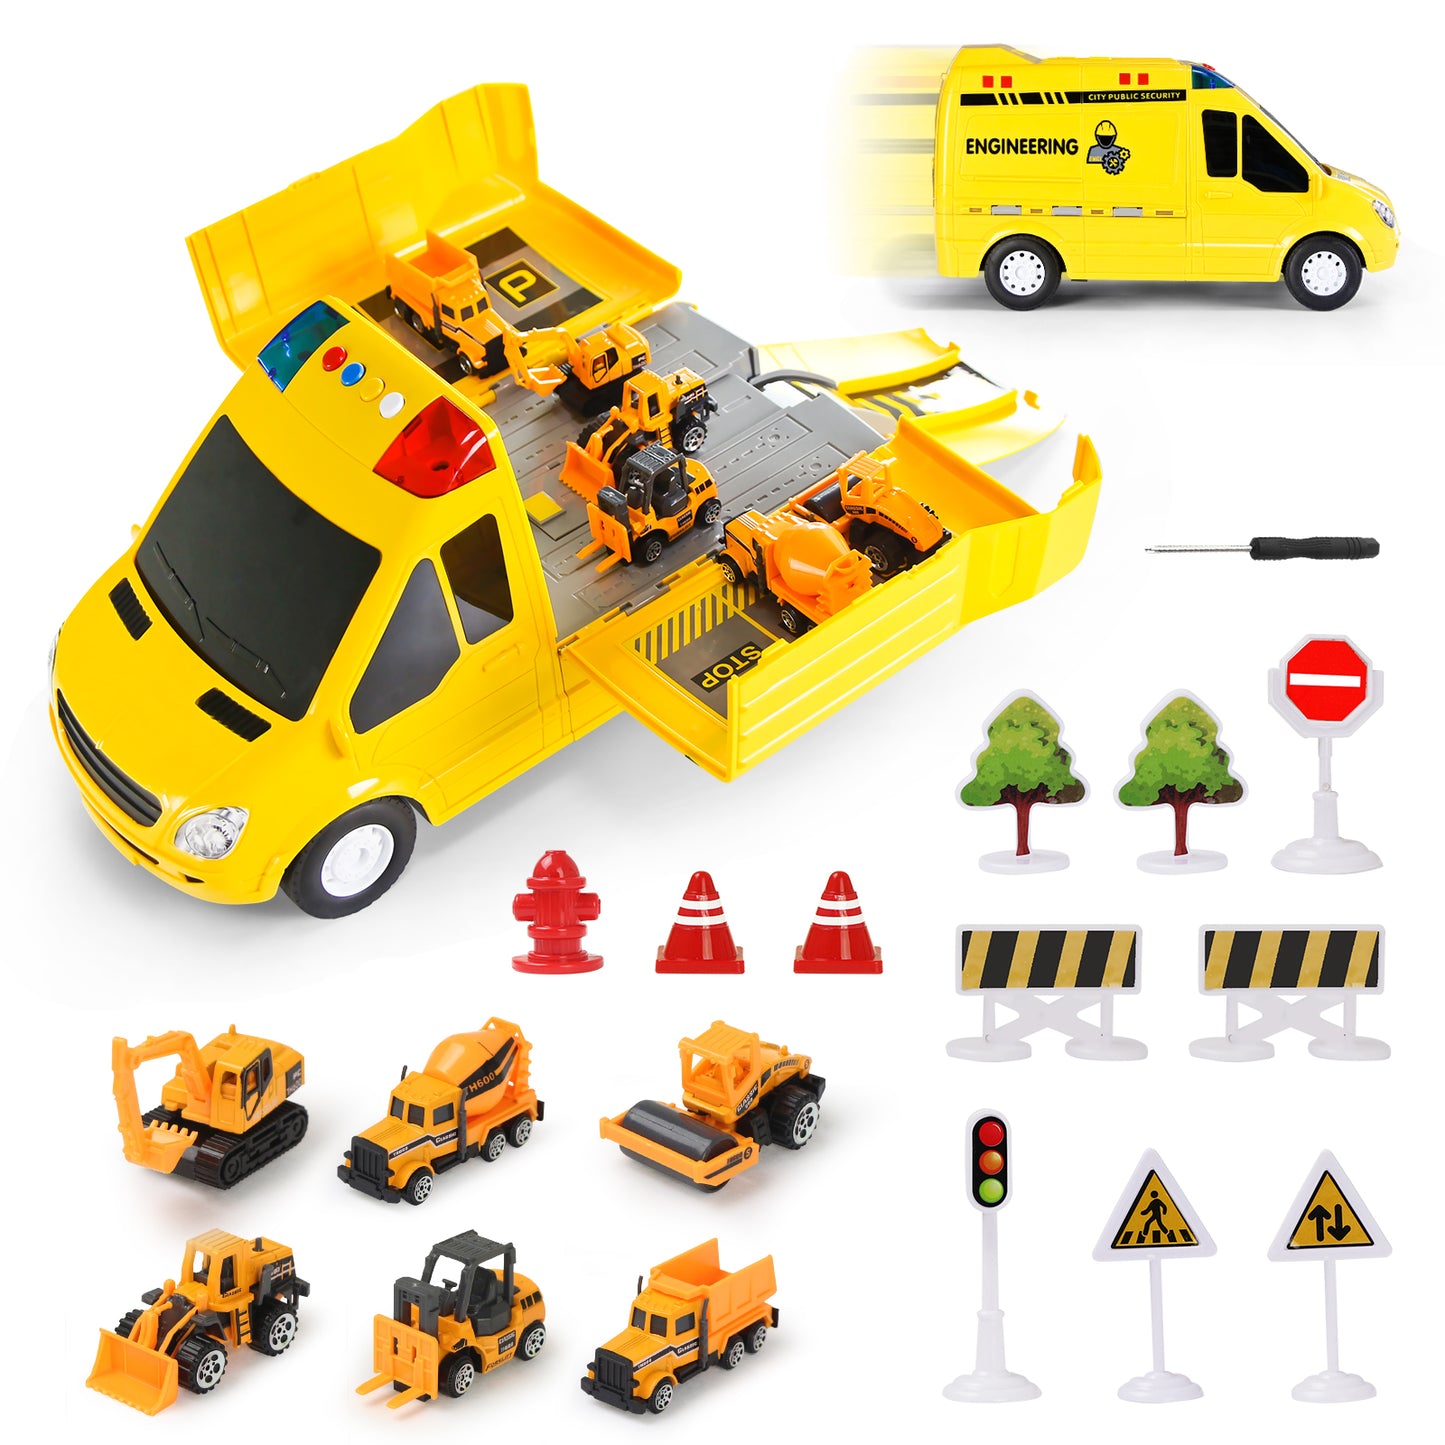 Joyfia Construction Truck Toys for 3 4 5 Years Old Toddlers Kids Boys and Girls Gifts, Transport Car Toy Set with Sound and Light, Big Carrier Truck with 6 Mini Excavator Mixer Bulldozer Dump Cars